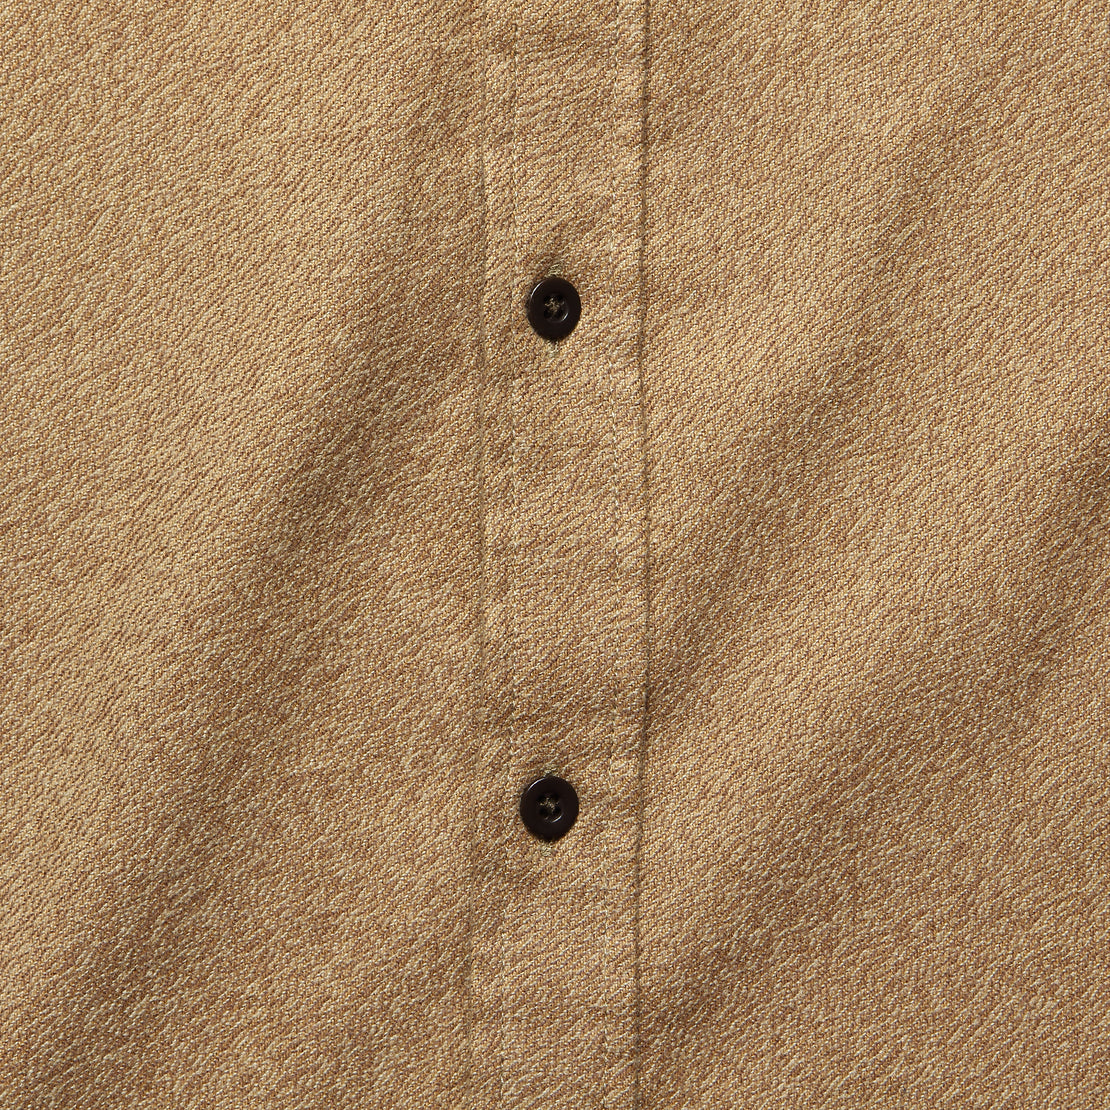 Canela Heather Flannel - Tan - Portuguese Flannel - STAG Provisions - Tops - L/S Woven - Solid